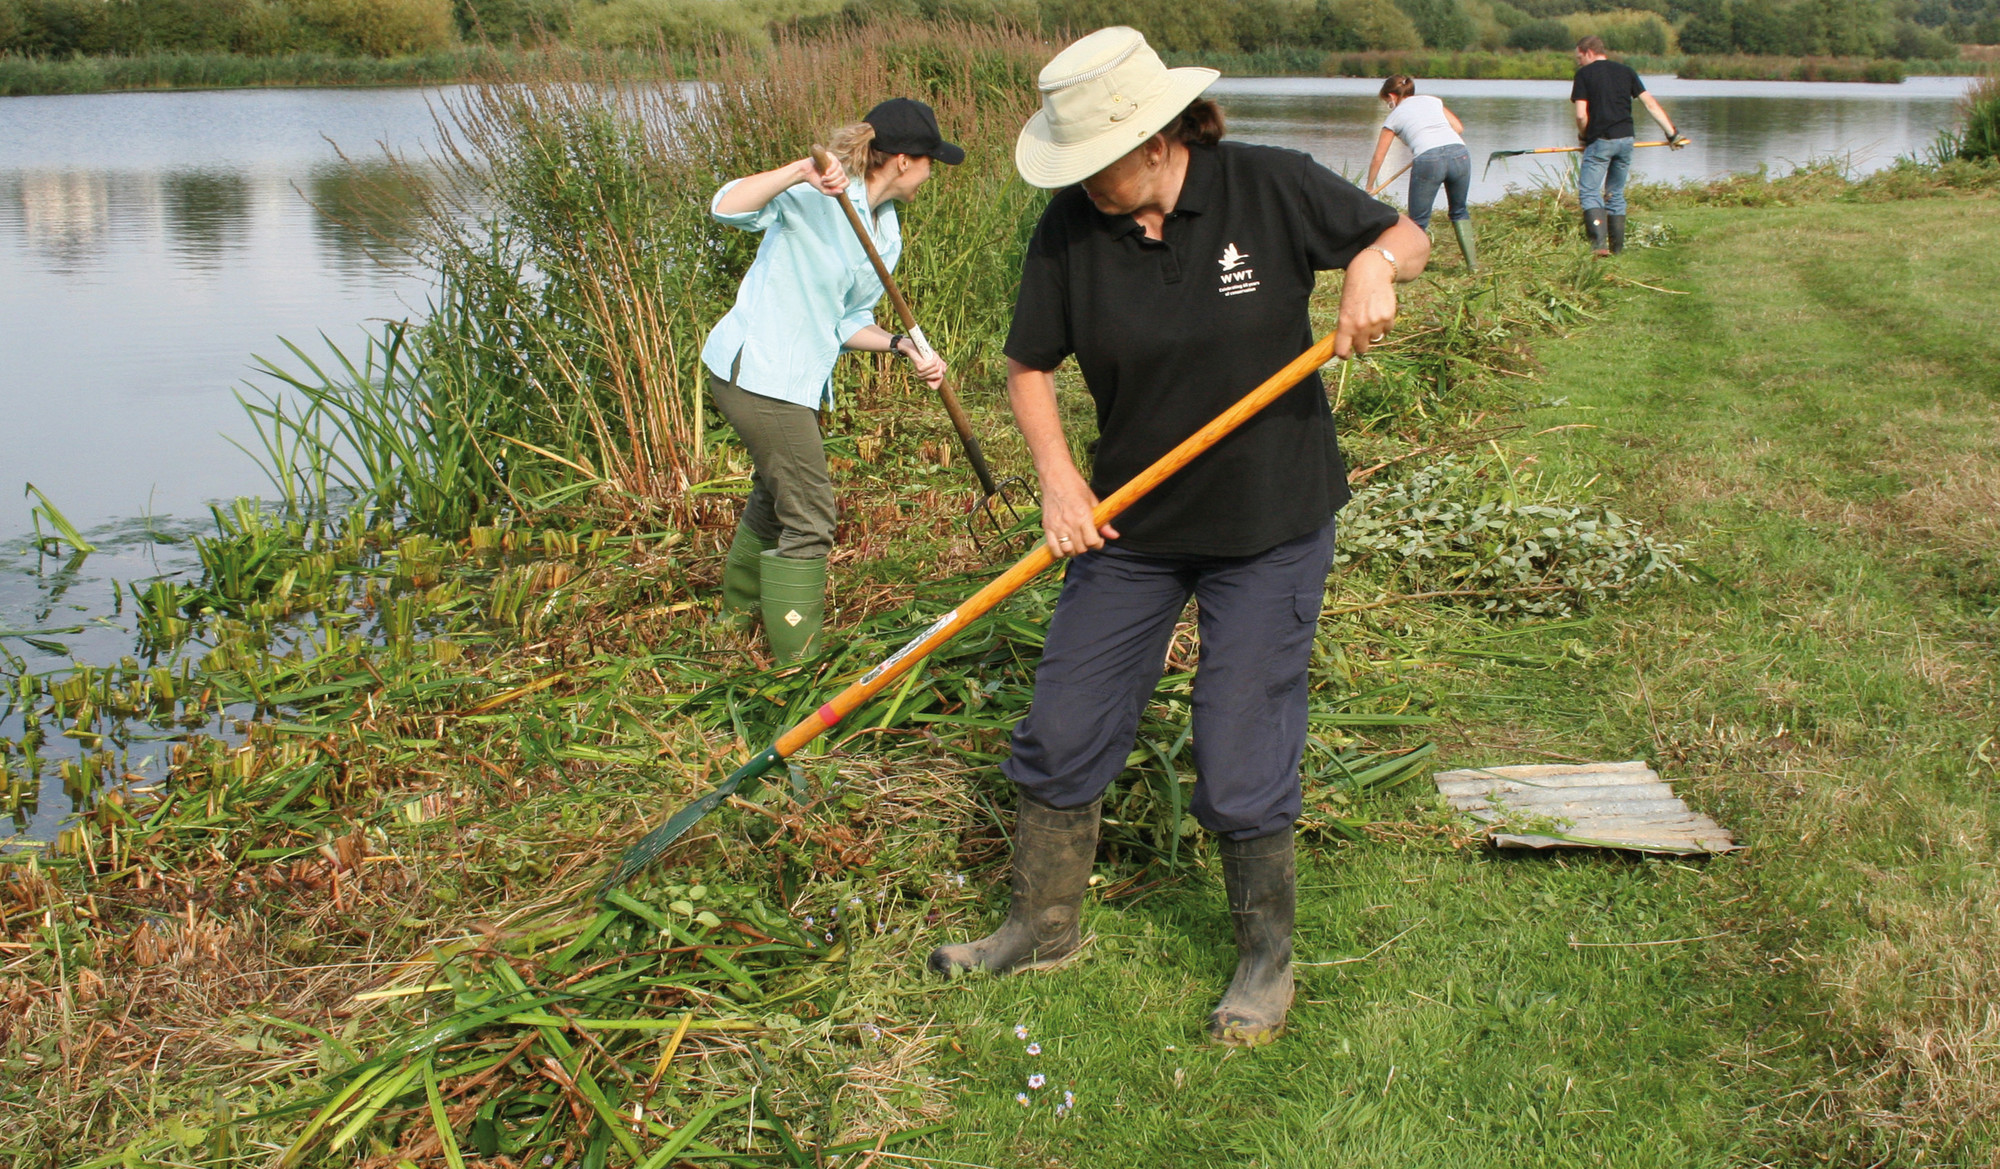 Reed clearing at WWT London Wetland Centre